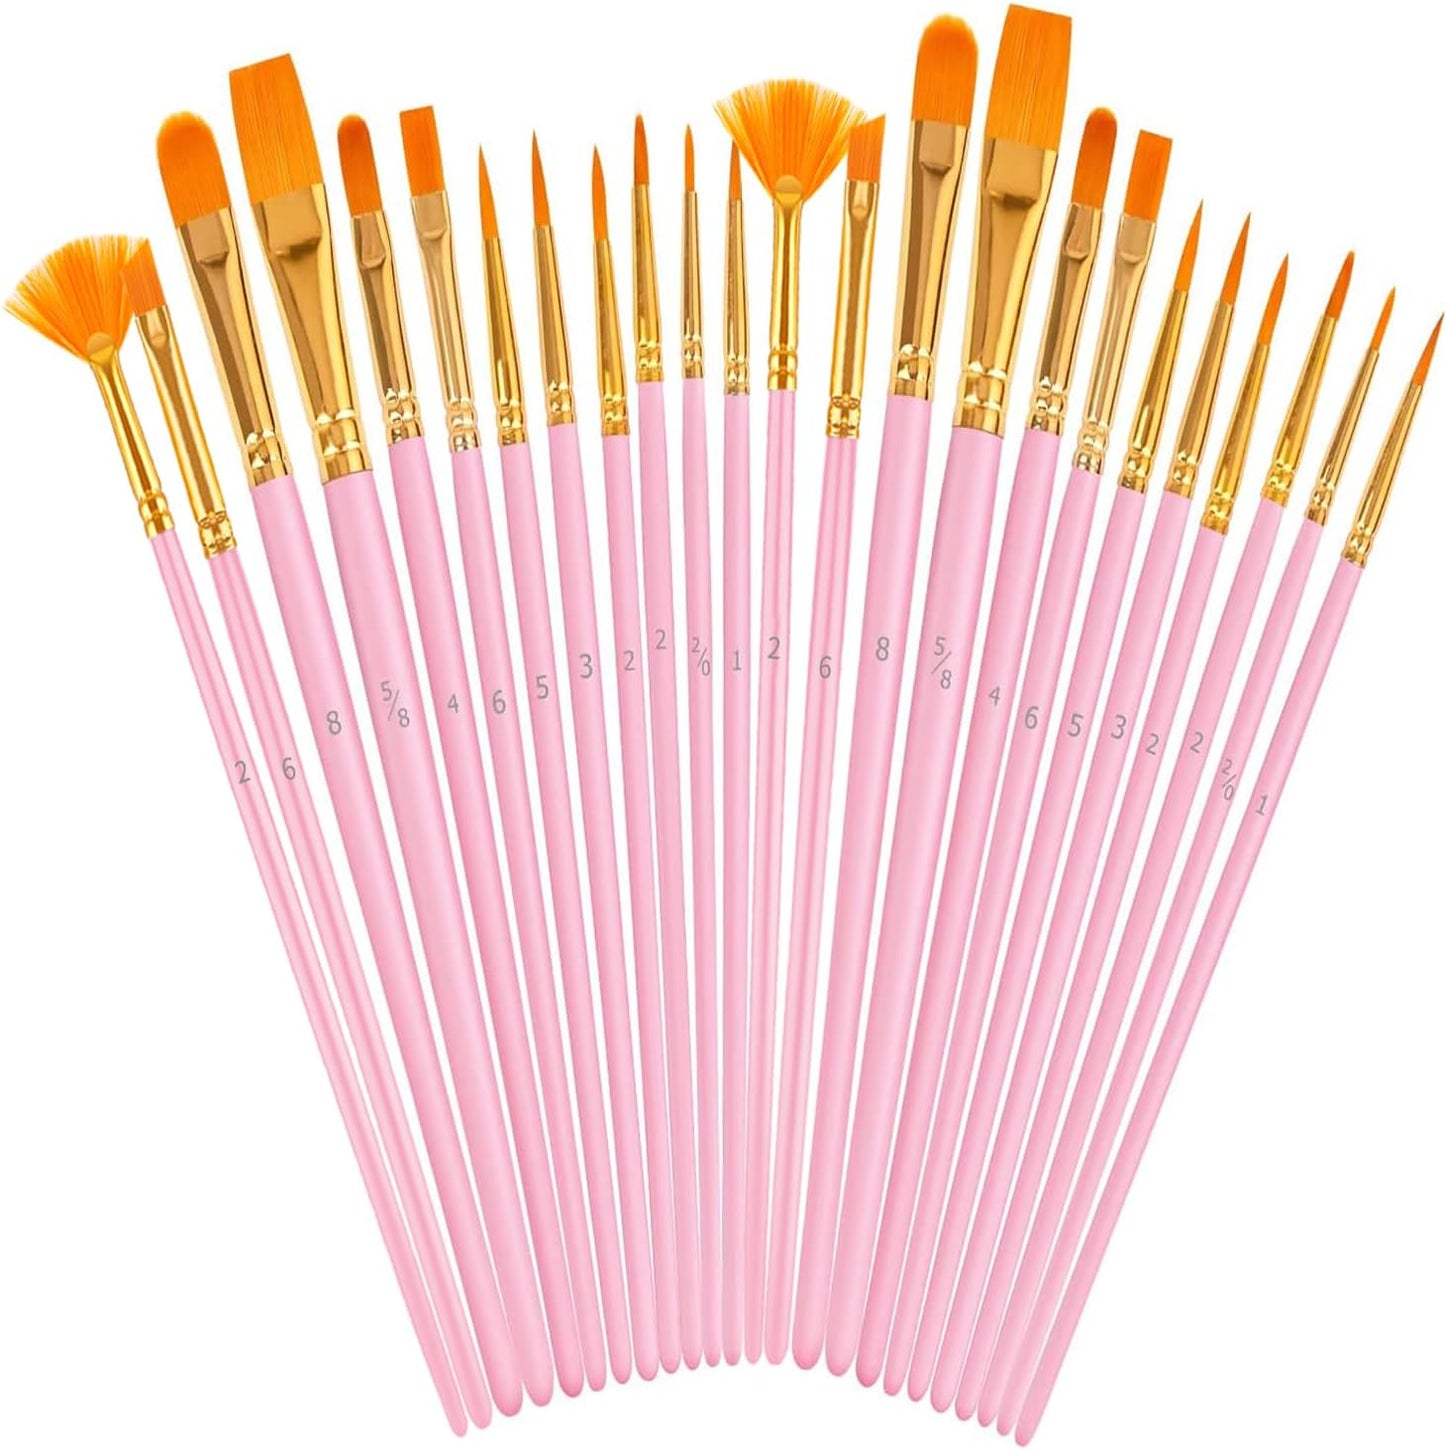 Acrylic Paint Brushes Set, 20Pcs round Pointed Tip Artist Paintbrushes for Acrylic Painting Oil Watercolor Canvas Boards Rock Body Face Nail Art, Halloween Pumpkin Ceramic Crafts Supplies